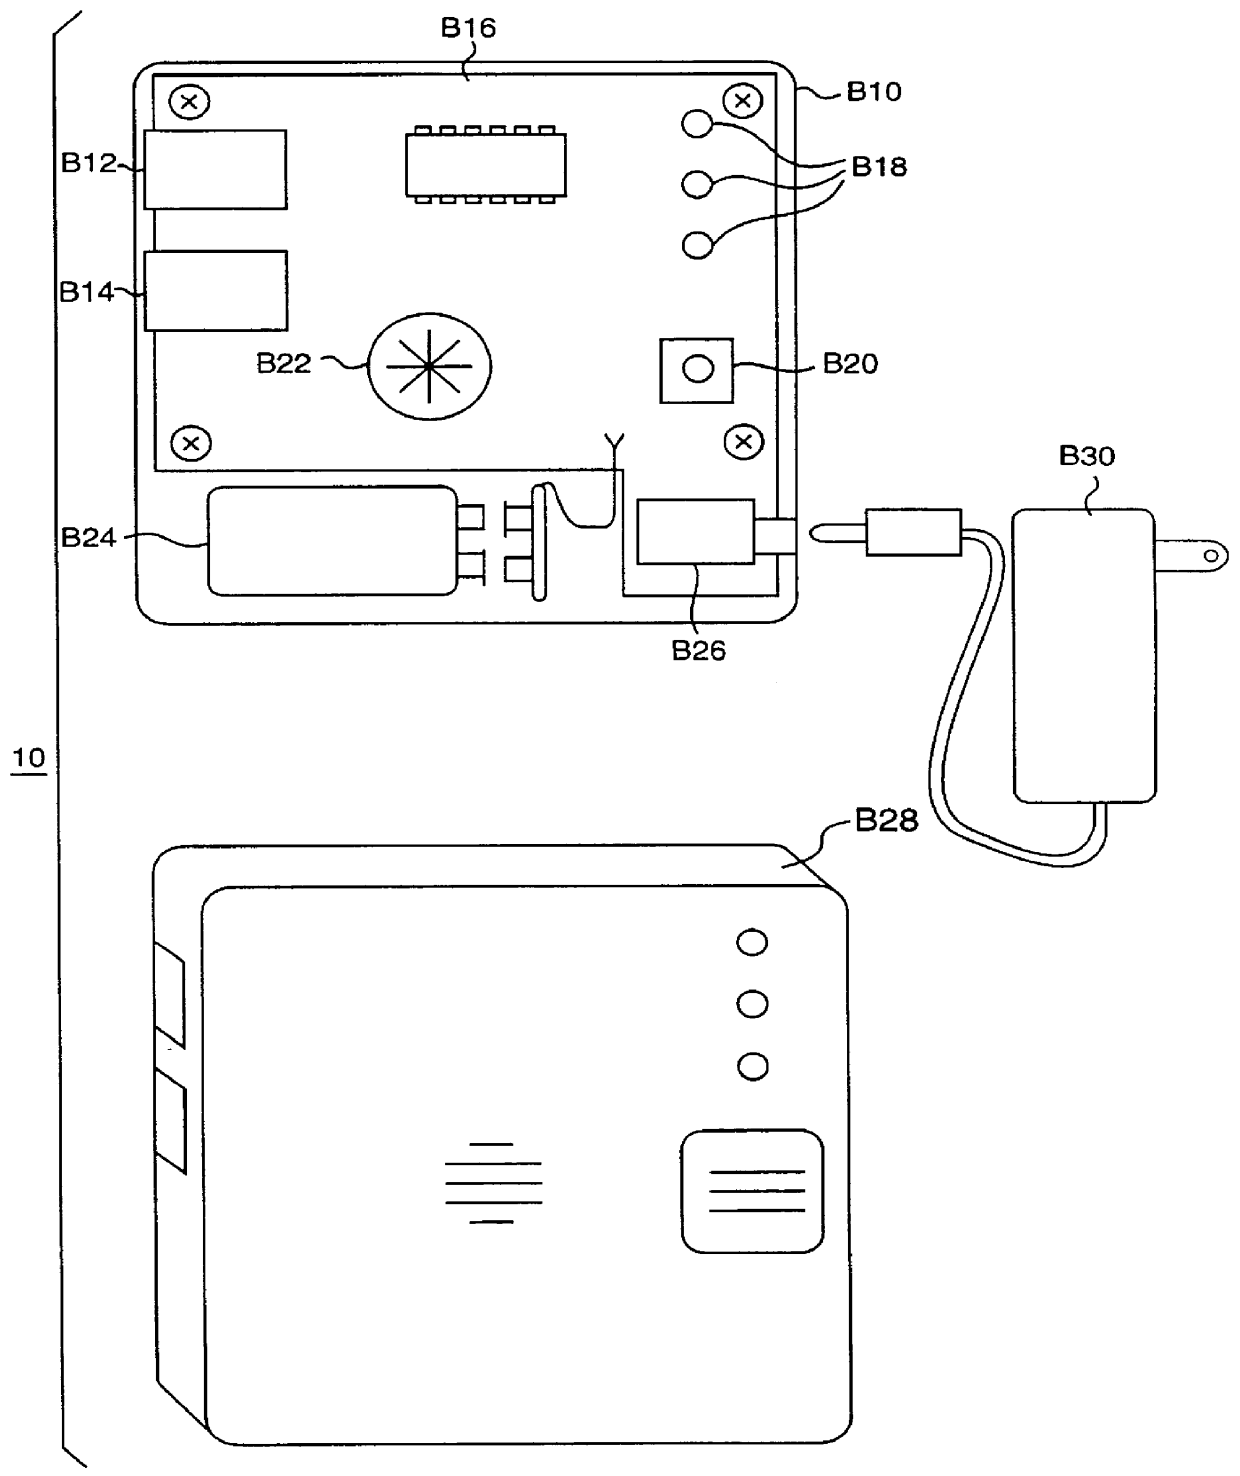 Community alarm/notification device, method and system